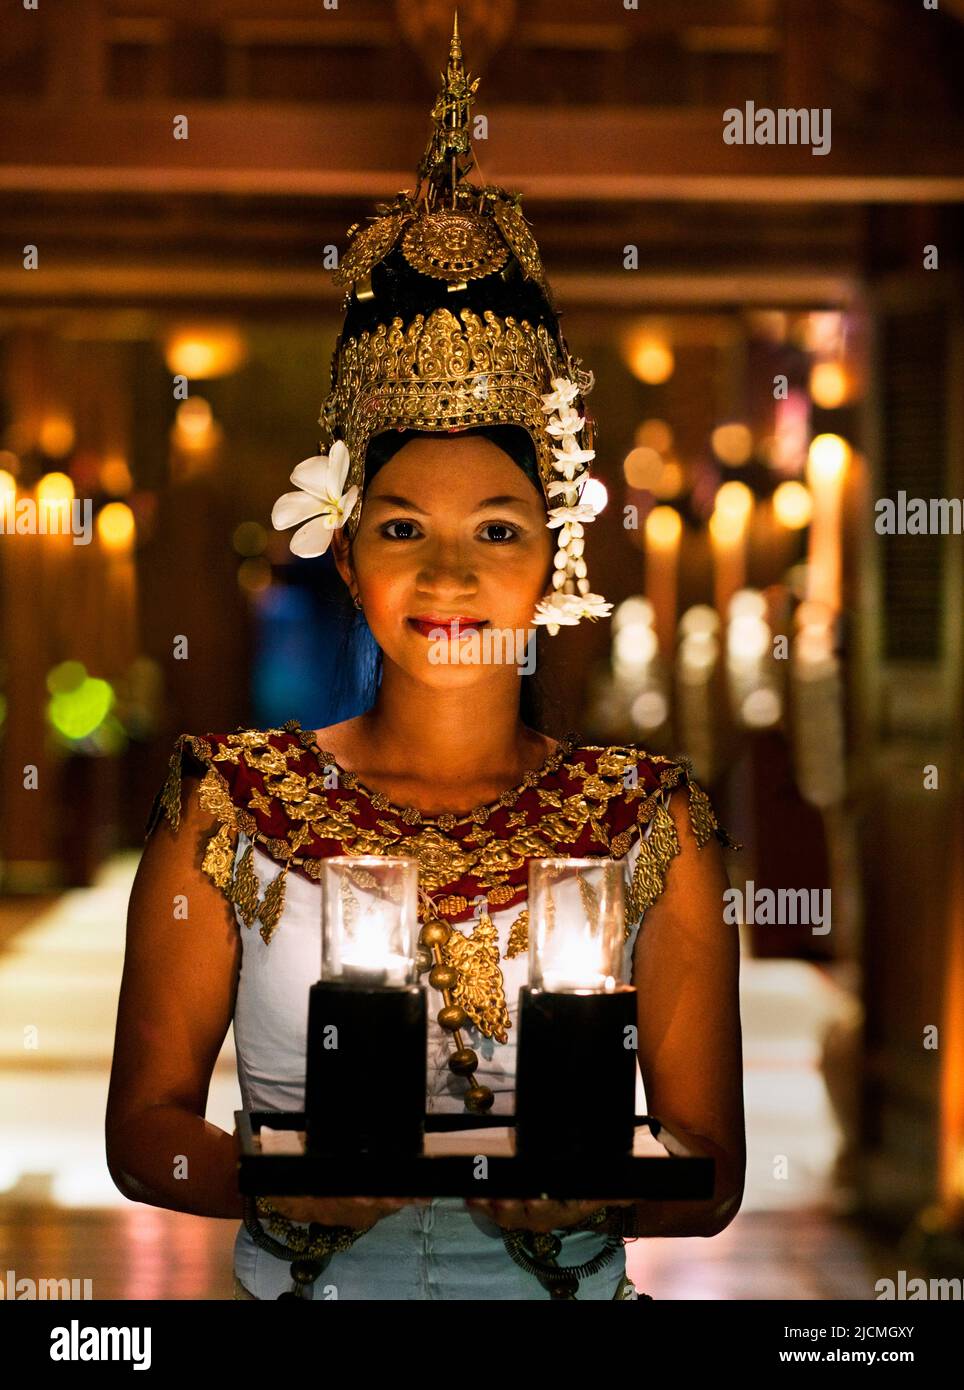 A young Cambodian Apsara dancer welcomes guests with a tray of candles at dusk at the entrance of a hotel, Siem Reap, Cambodia. Stock Photo